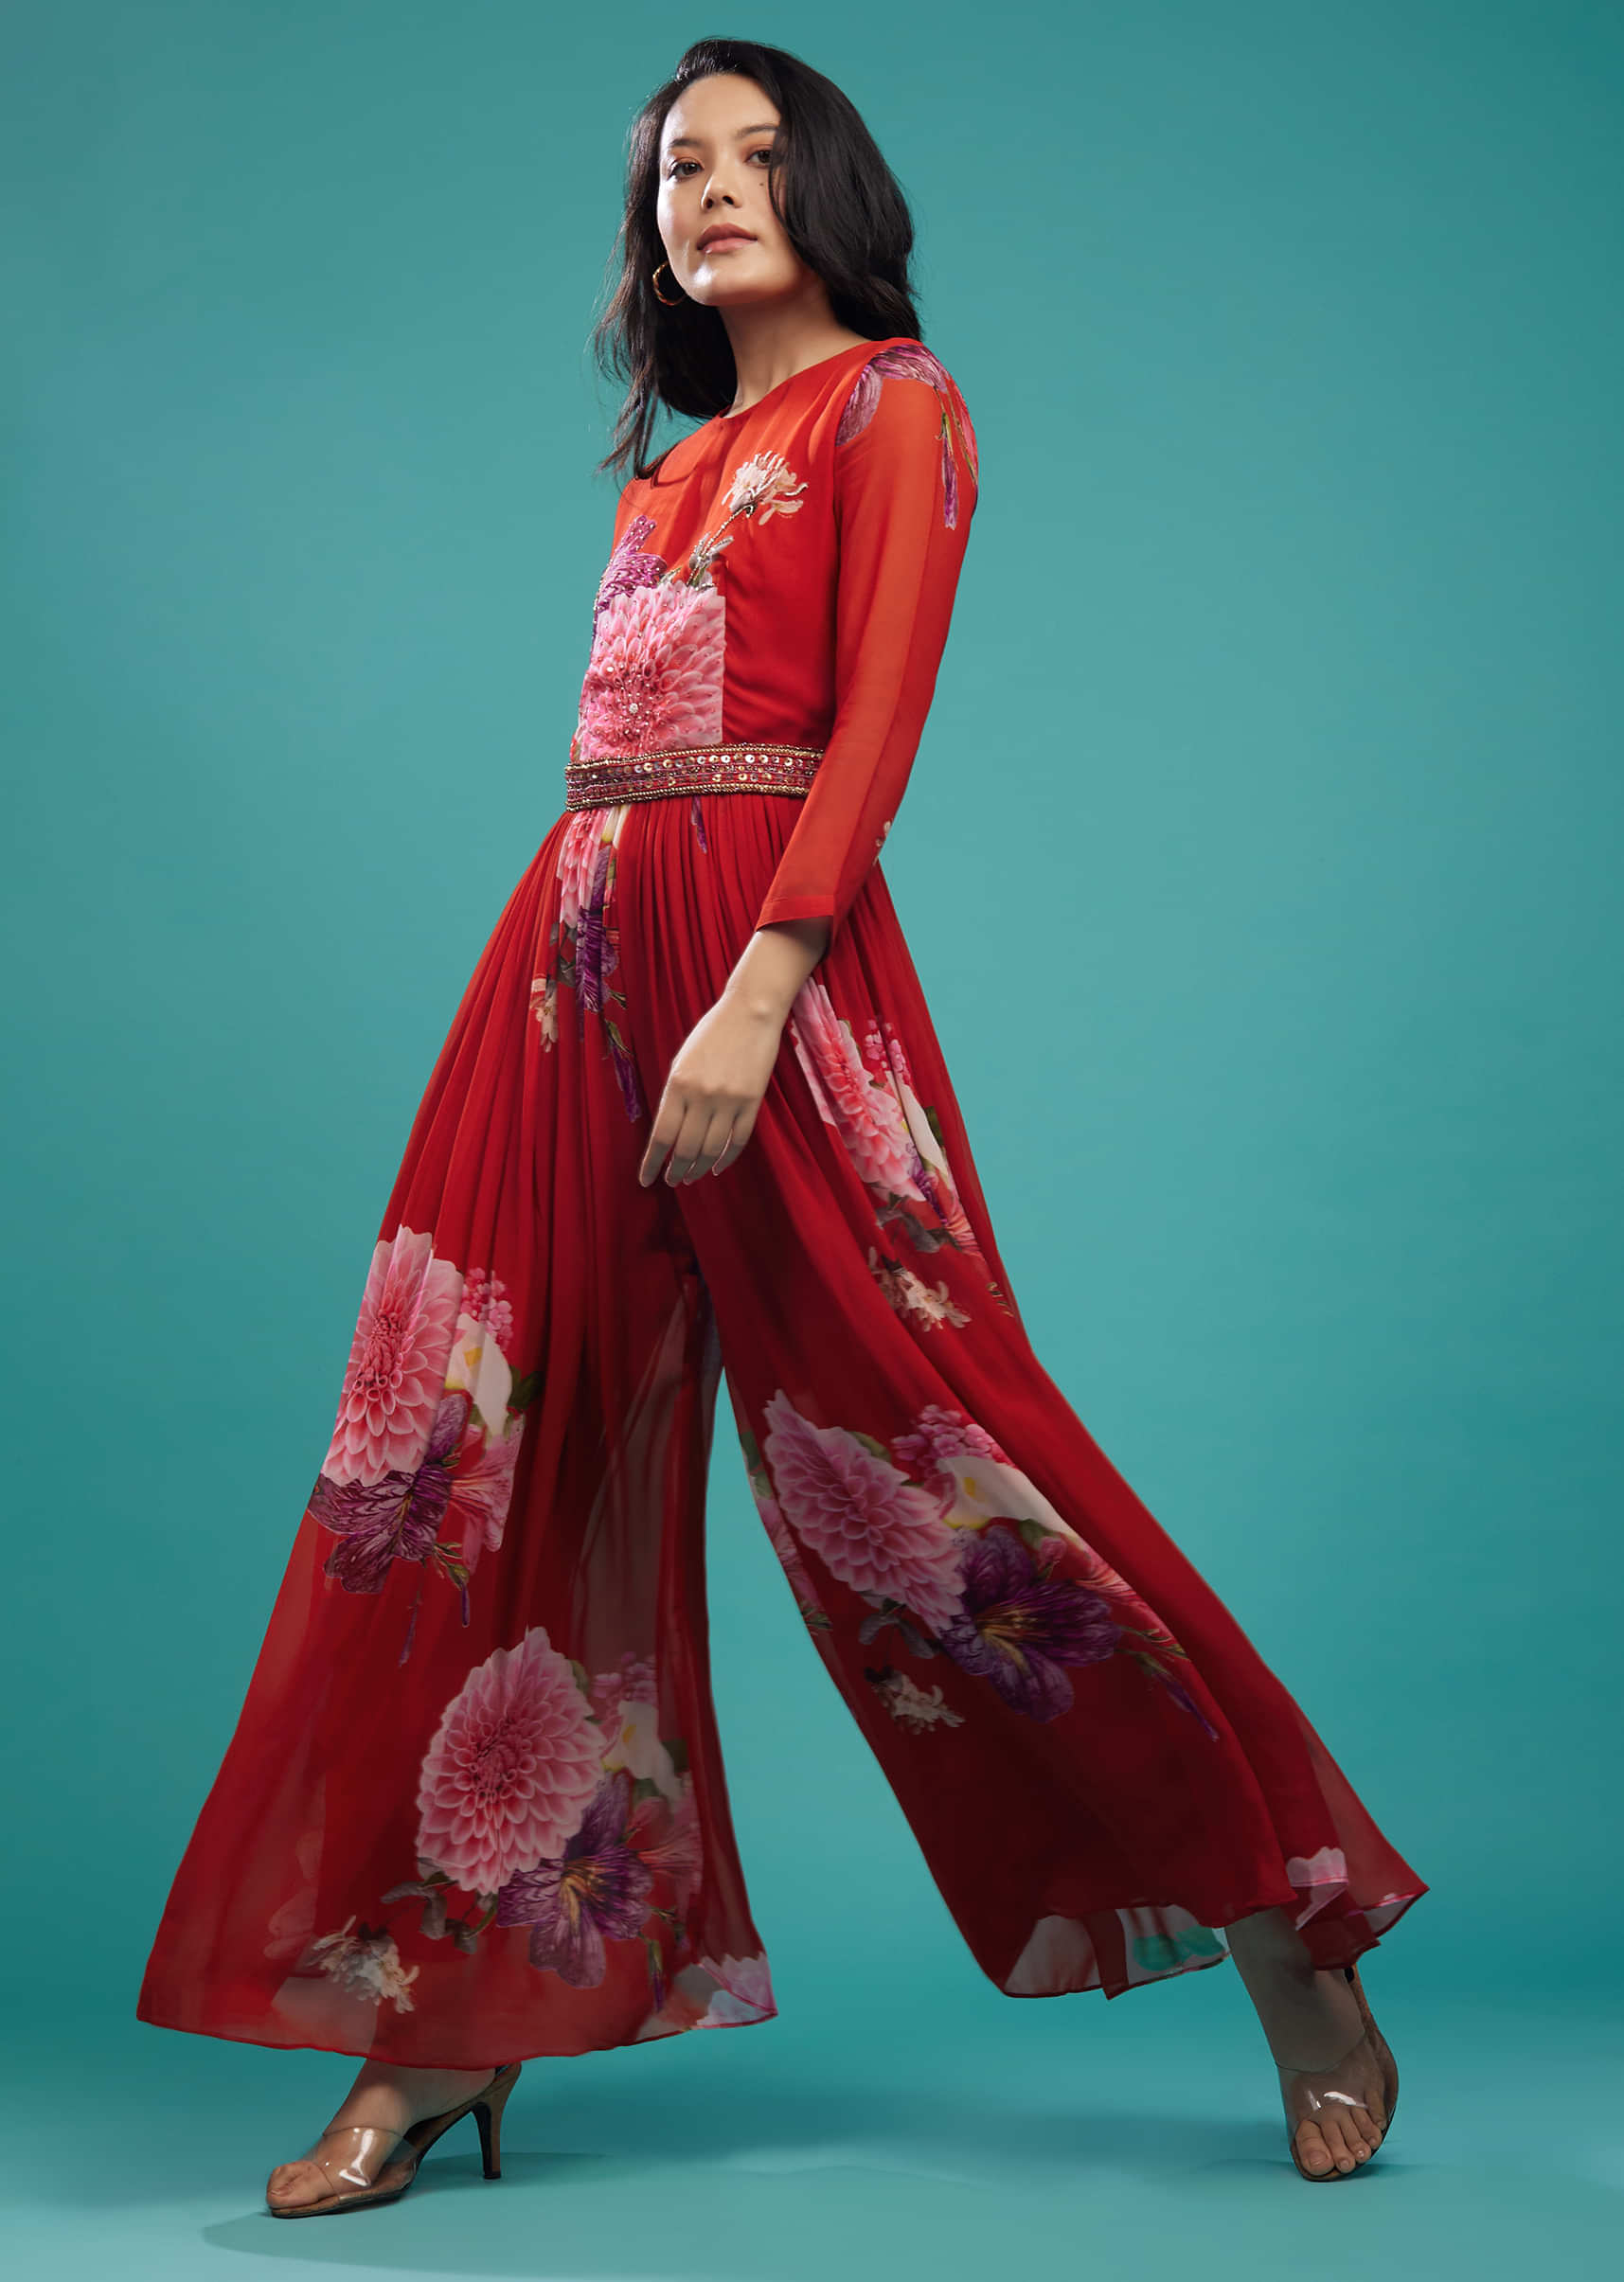 Fiery Red Pleated Jumpsuit In Floral Print And Hand Embroidered Waist Belt